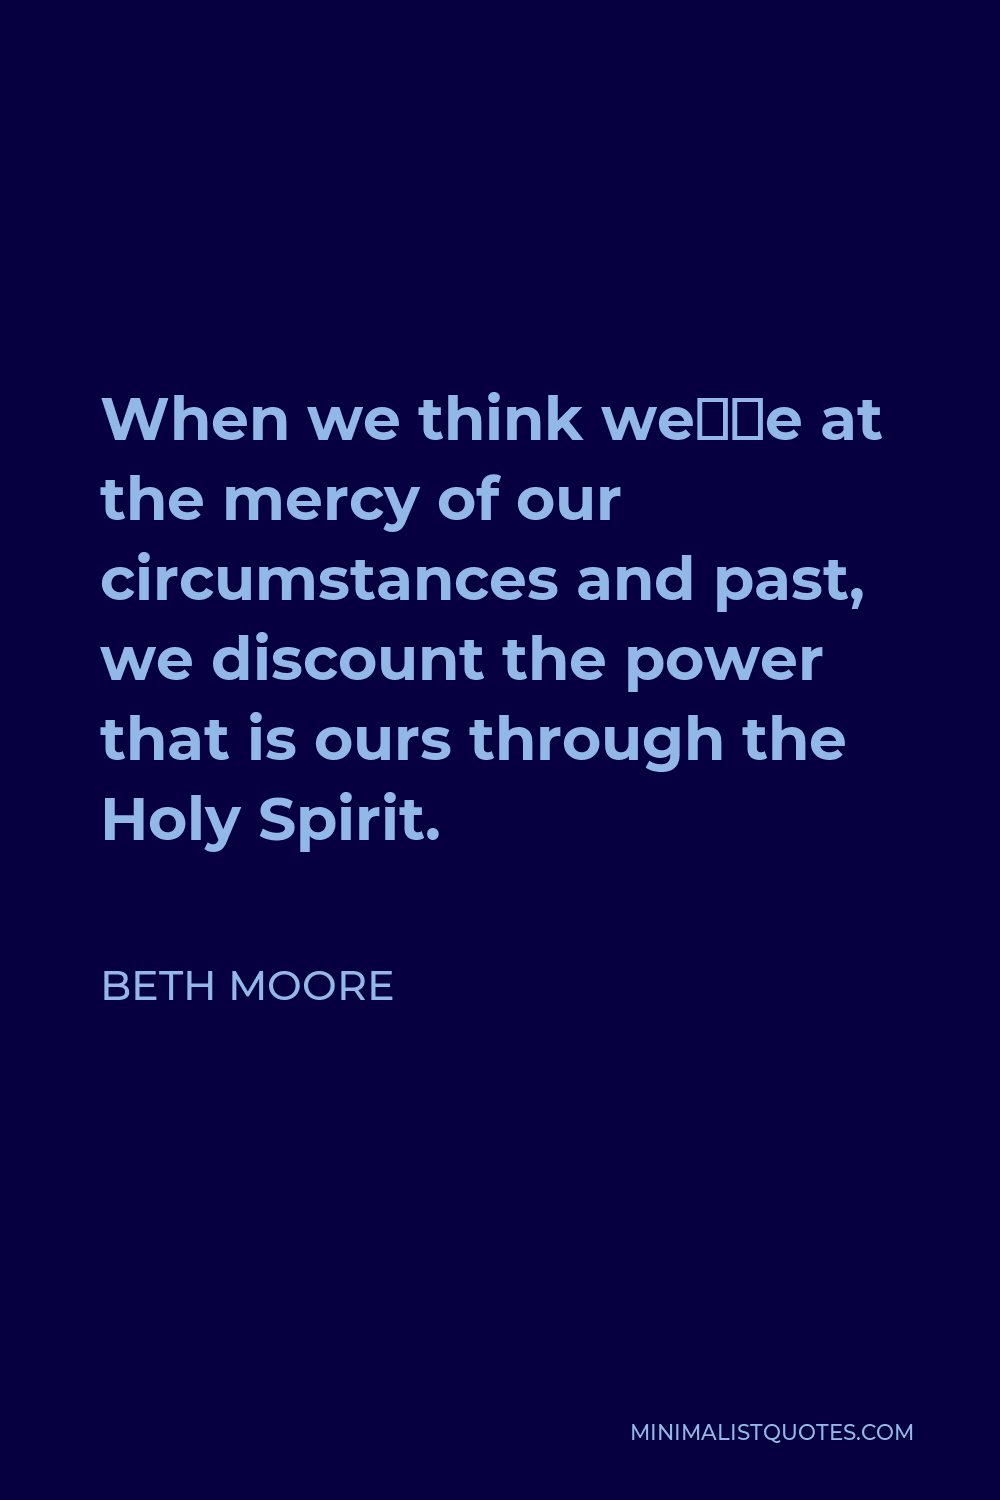 Beth Moore Quote - When we think we’re at the mercy of our circumstances and past, we discount the power that is ours through the Holy Spirit.